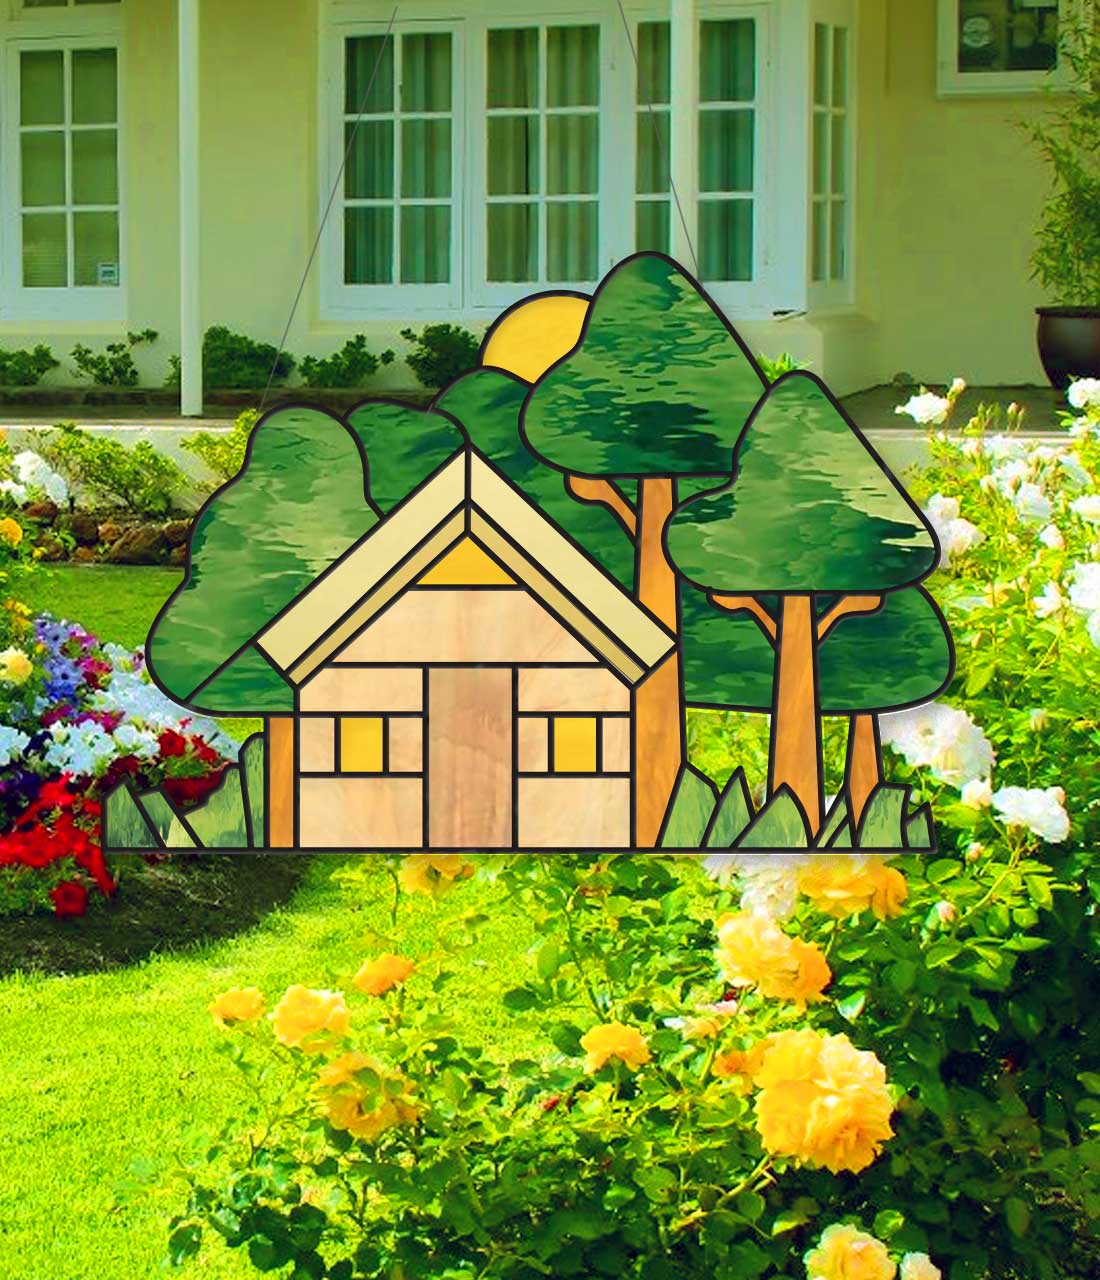 Stained Glass Ornaments – Housing a Forest